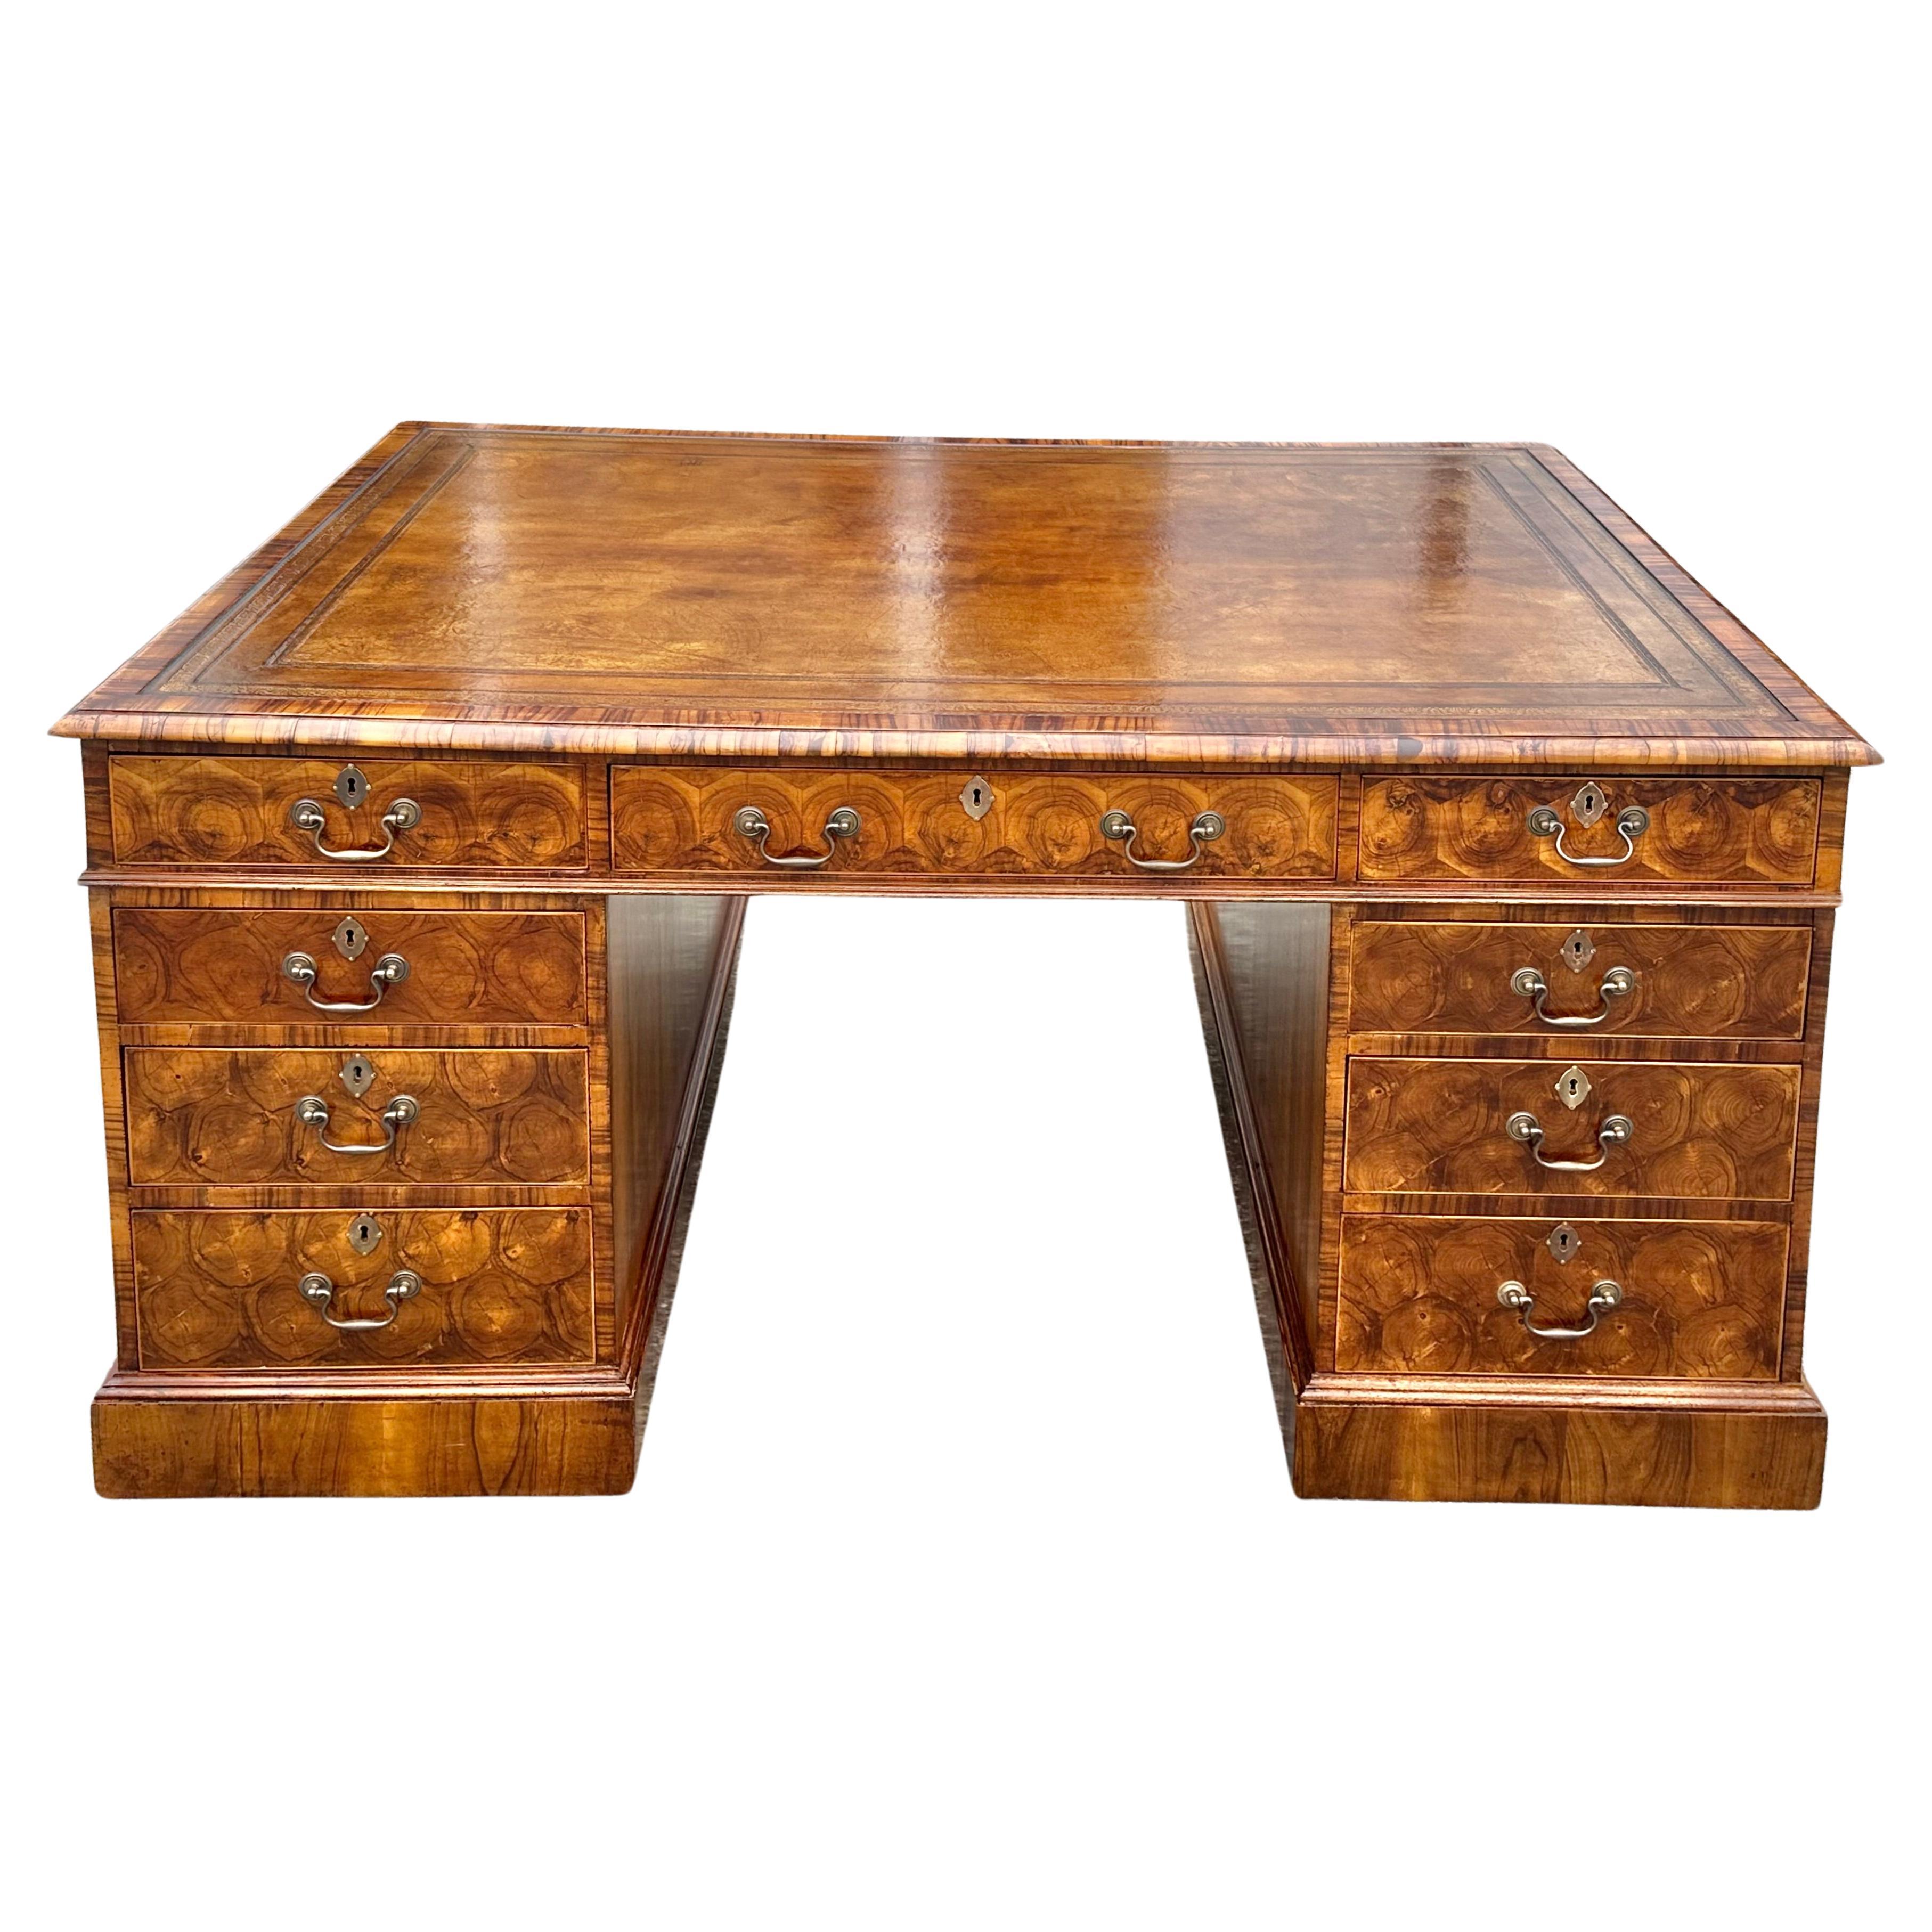 Magnificent Late 19th Century Oyster Walnut Partners Desk.  Beautiful matched and patterned oyster walnut veneer.  Two pedestals with graduated drawers on one side and cabinets on the opposite.  Top with drawers on both sides.  Mellow patina and